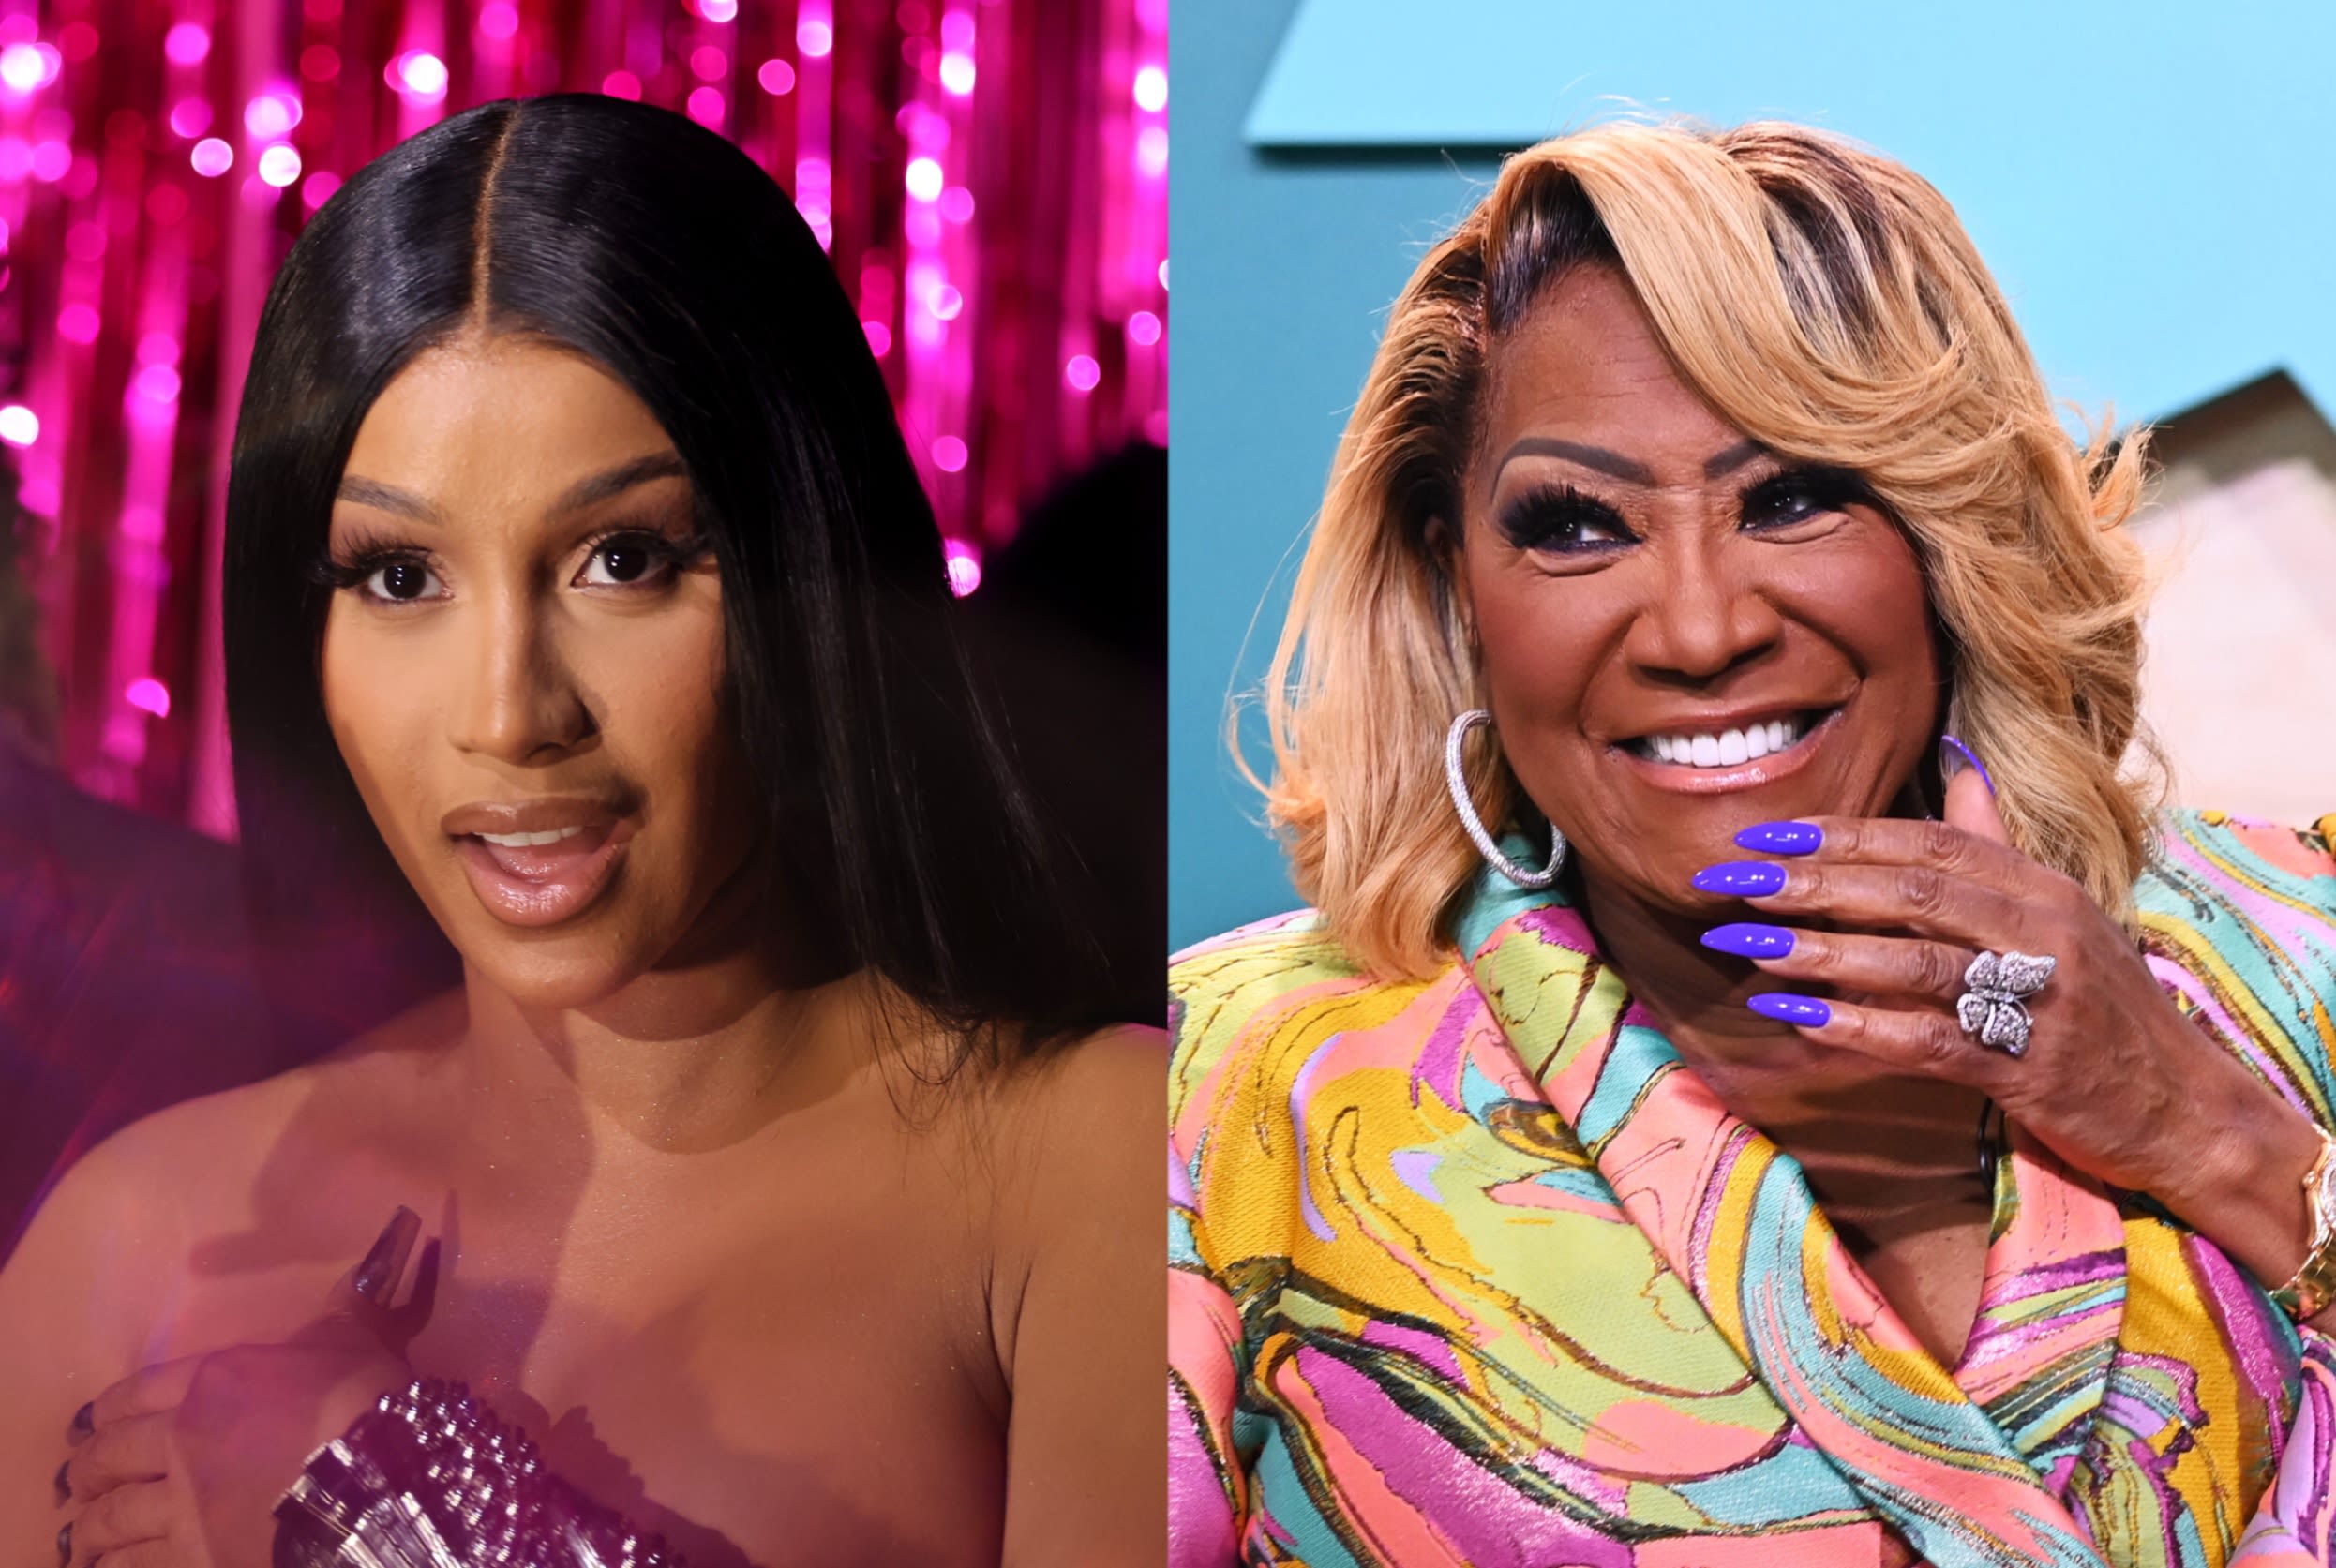 Patti LaBelle Wants To Do New Music And Collaboration With 'New Best Friend' Cardi B